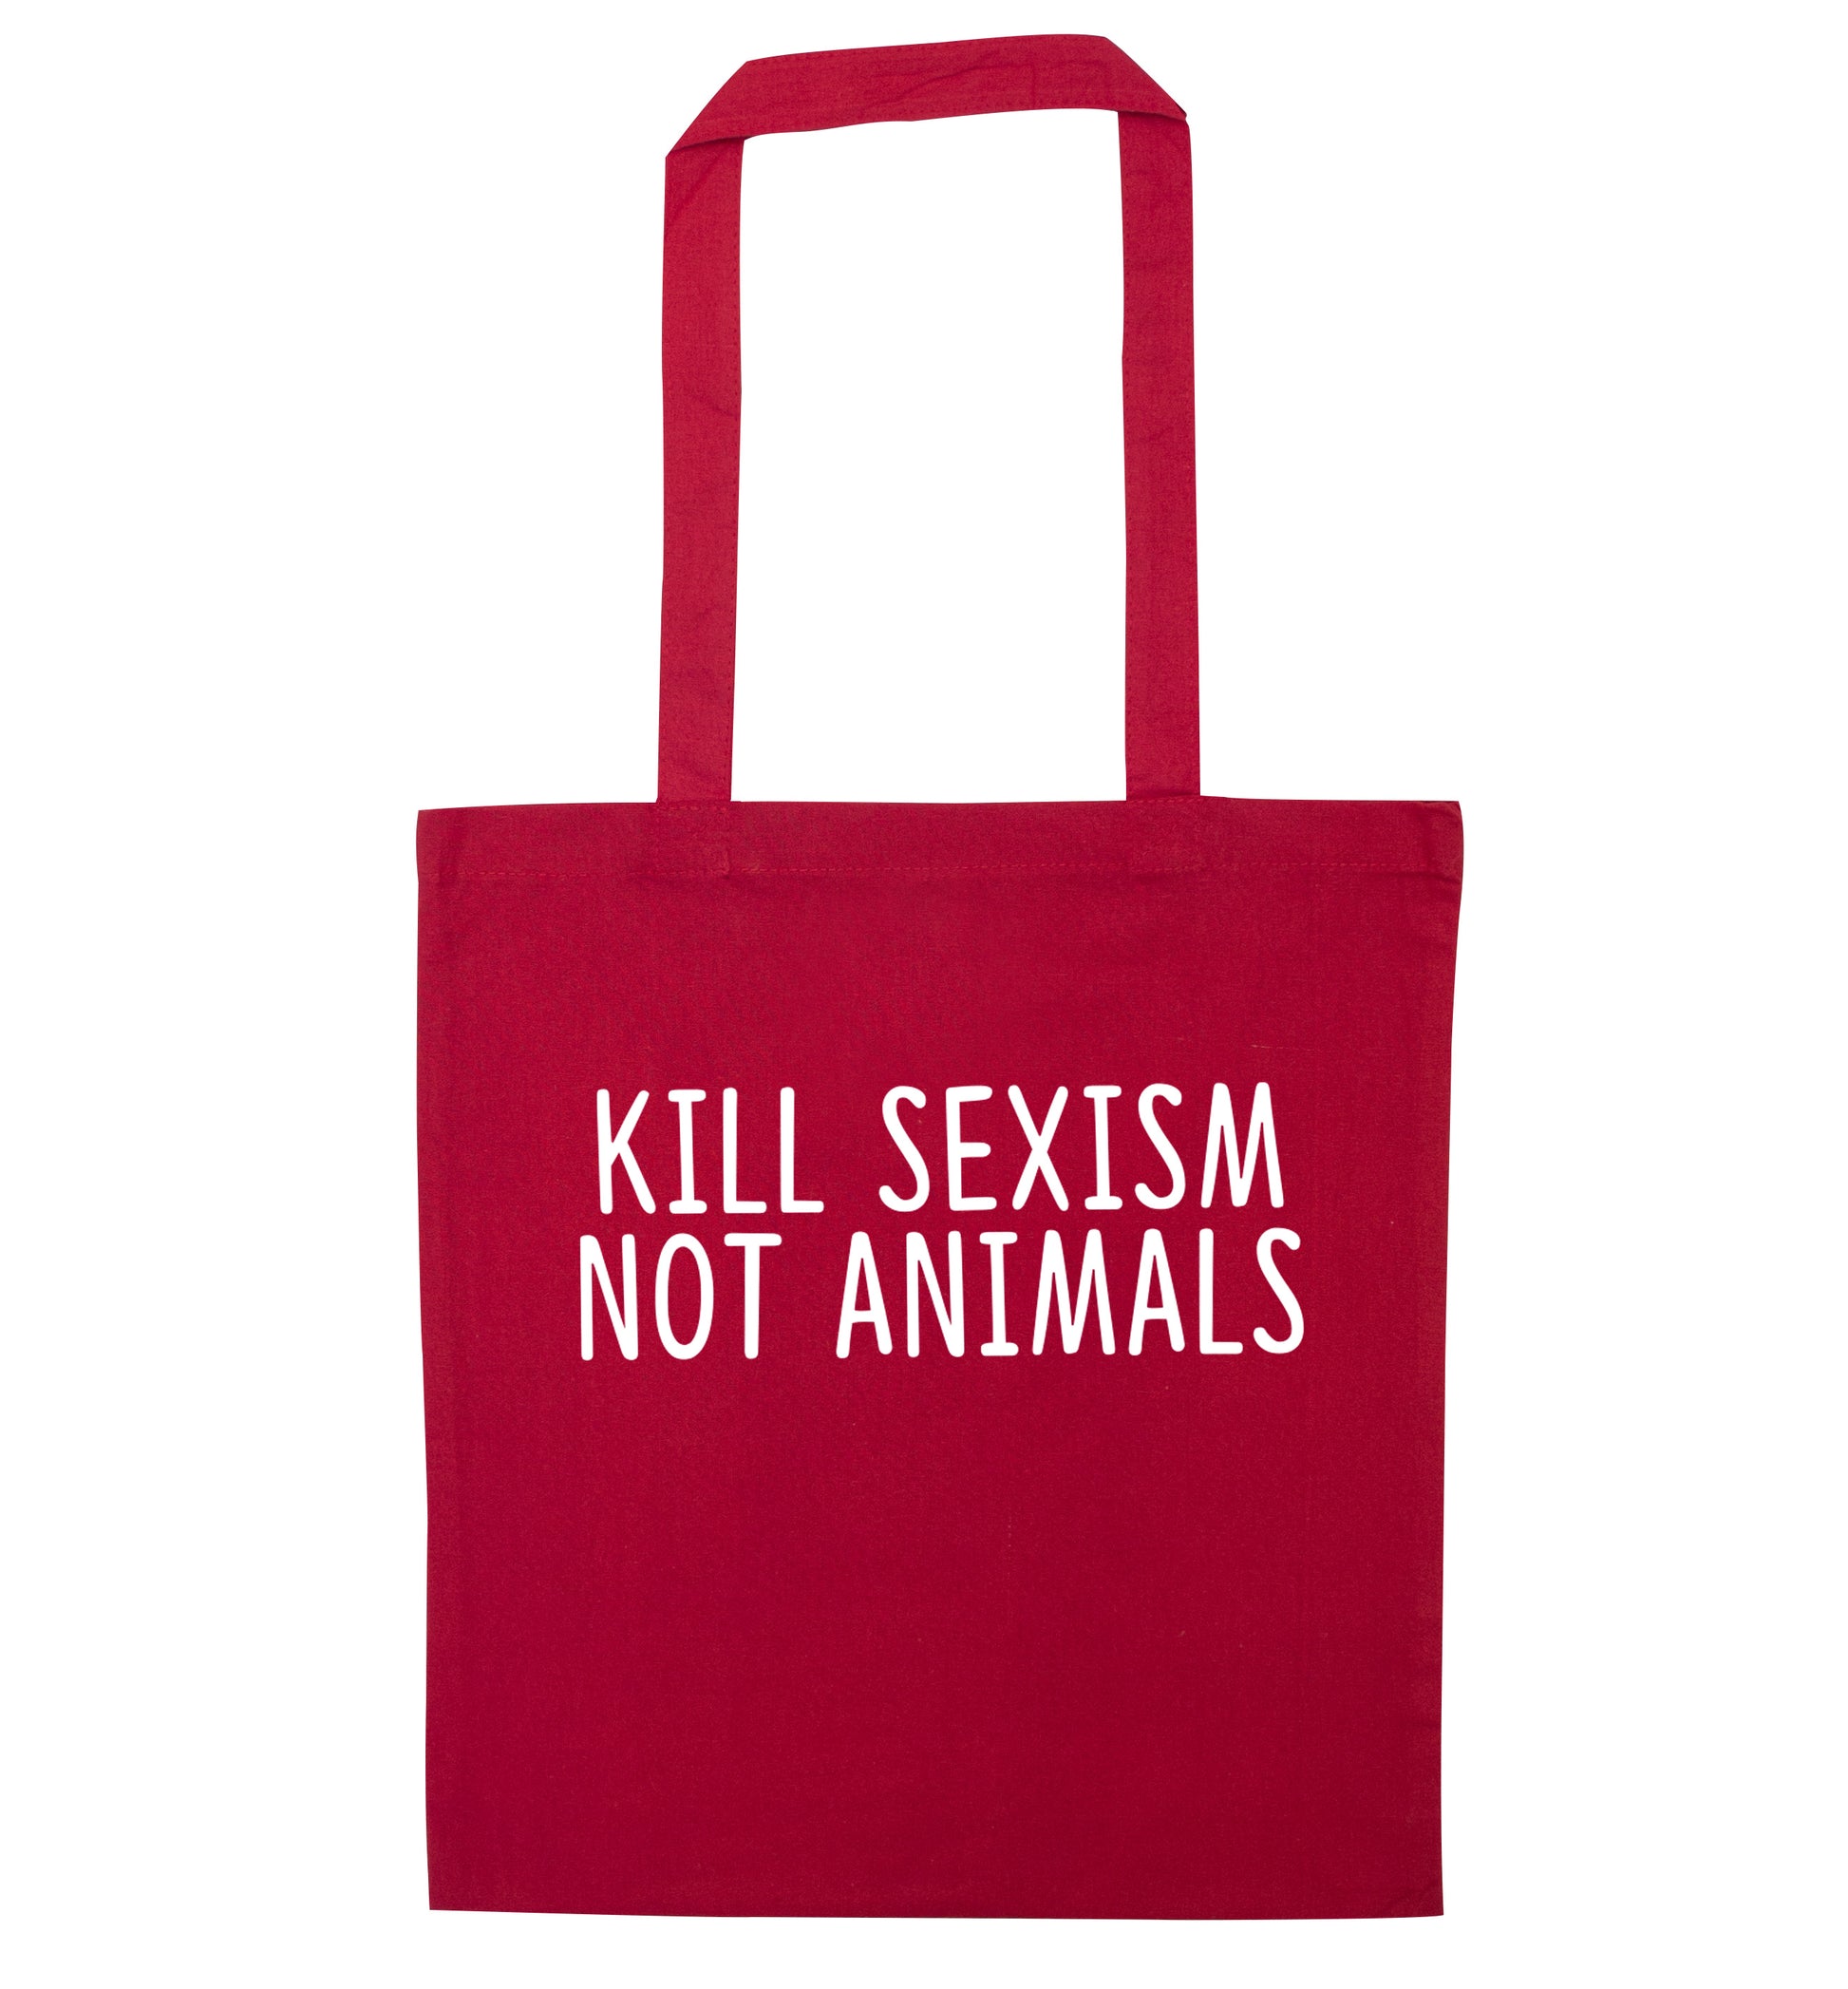 Kill Sexism Not Animals red tote bag